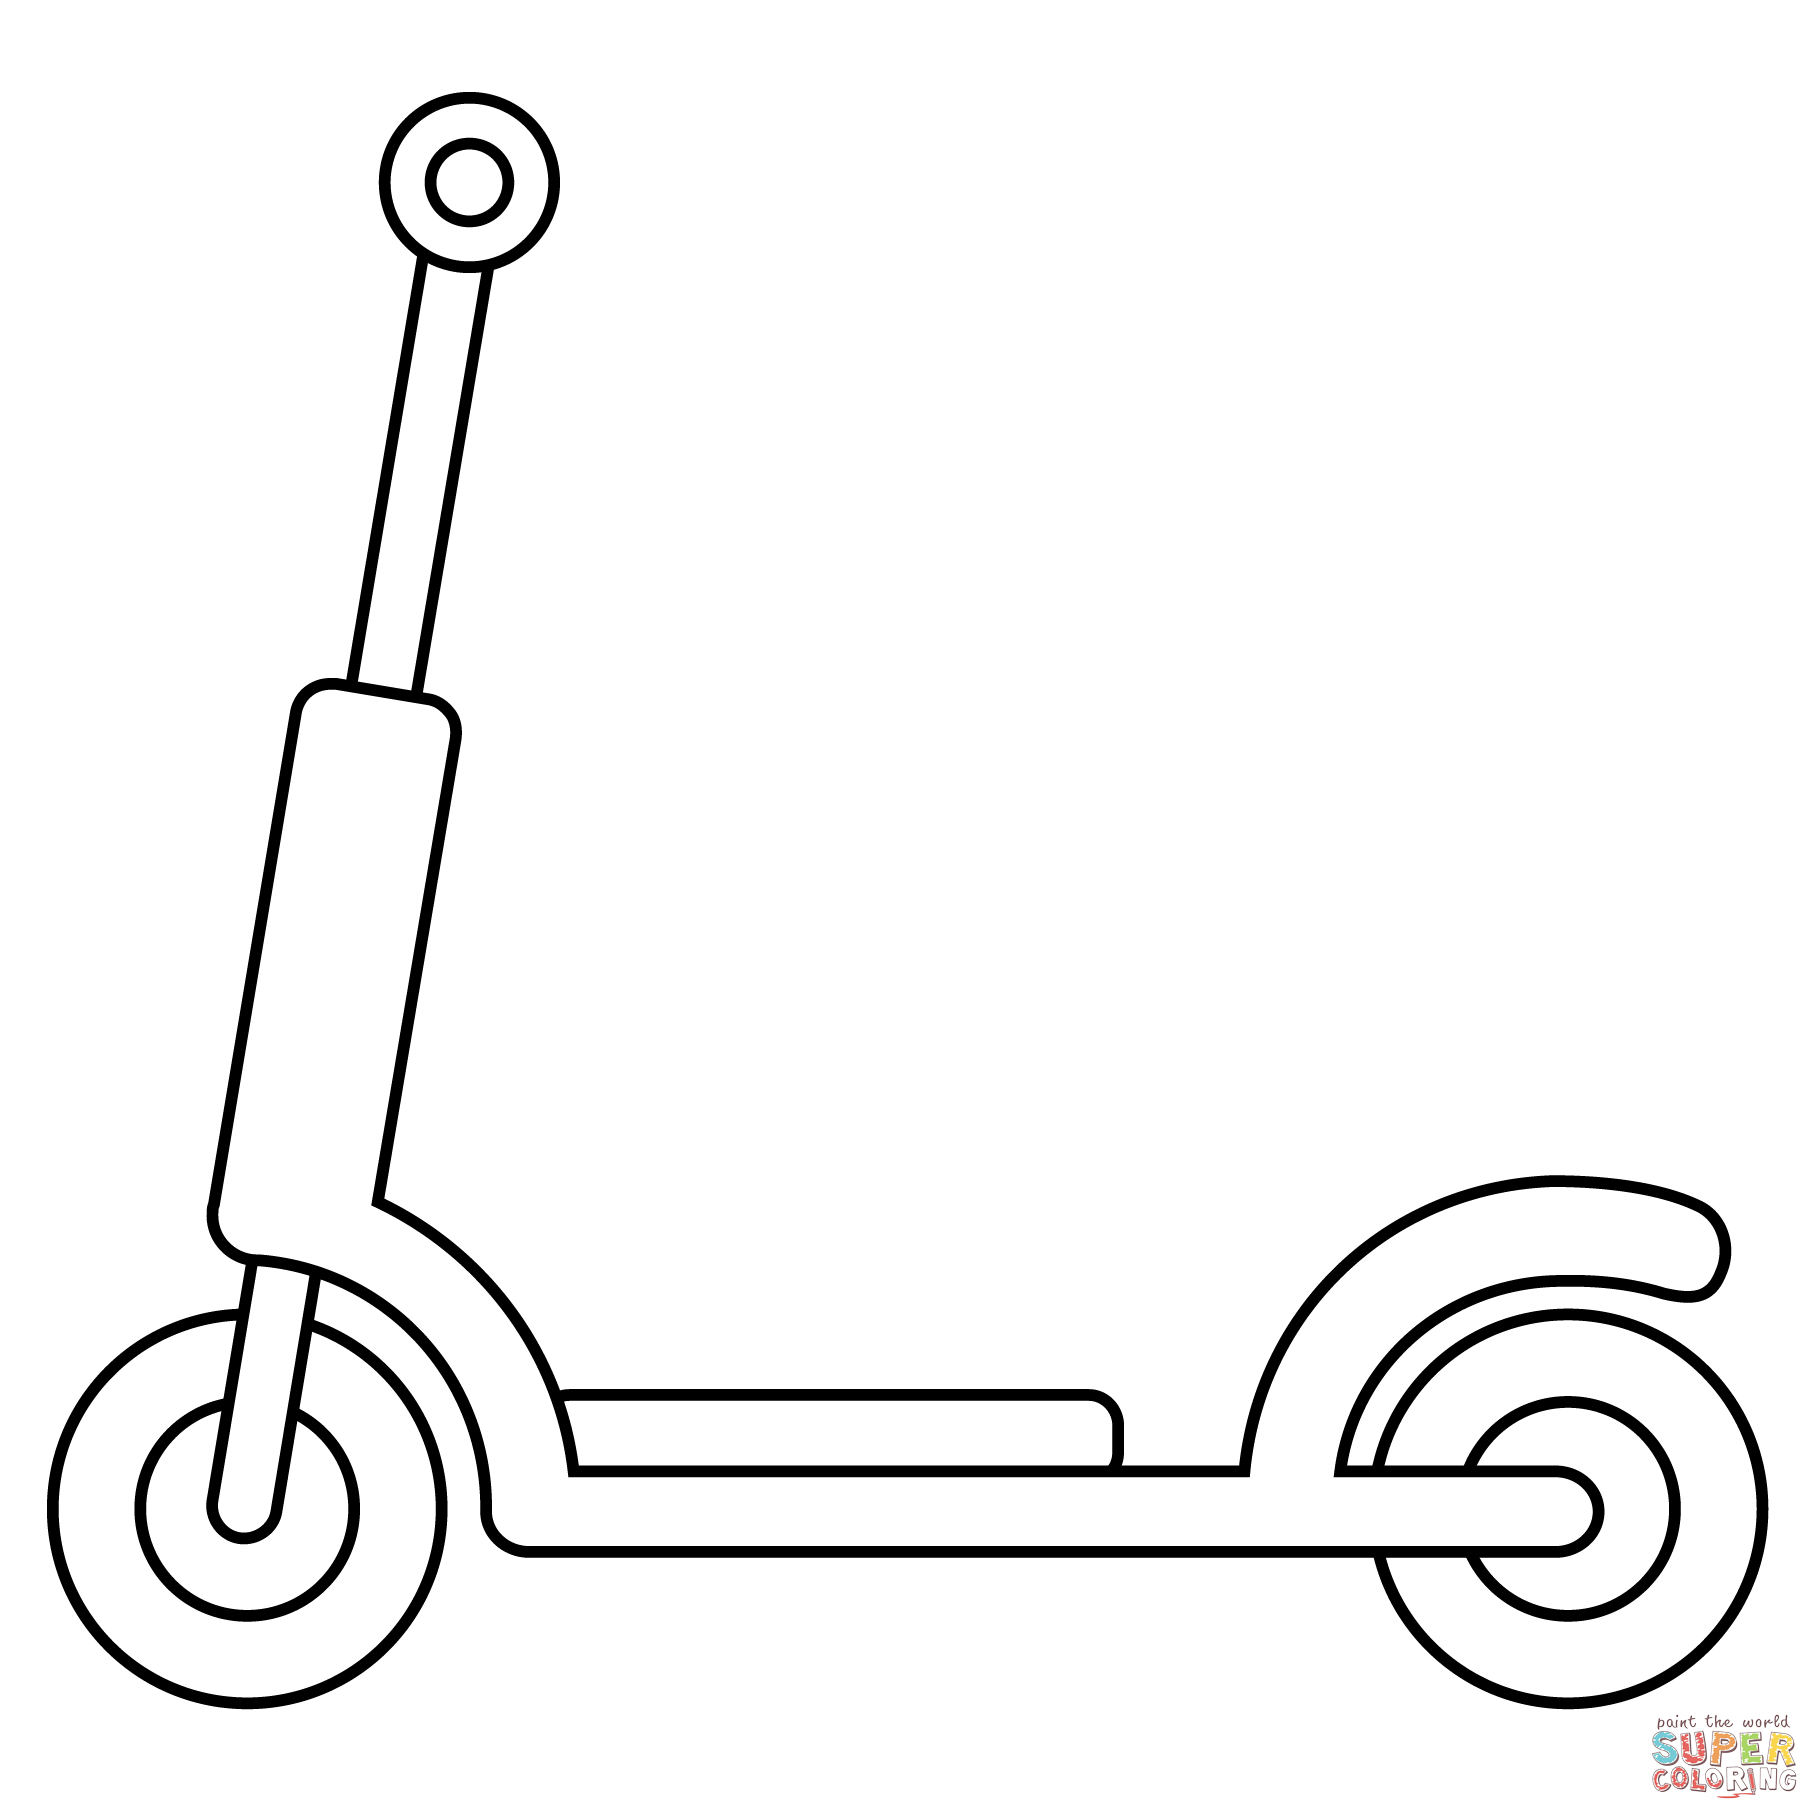 Kick scooter emoji coloring page free printable coloring pages